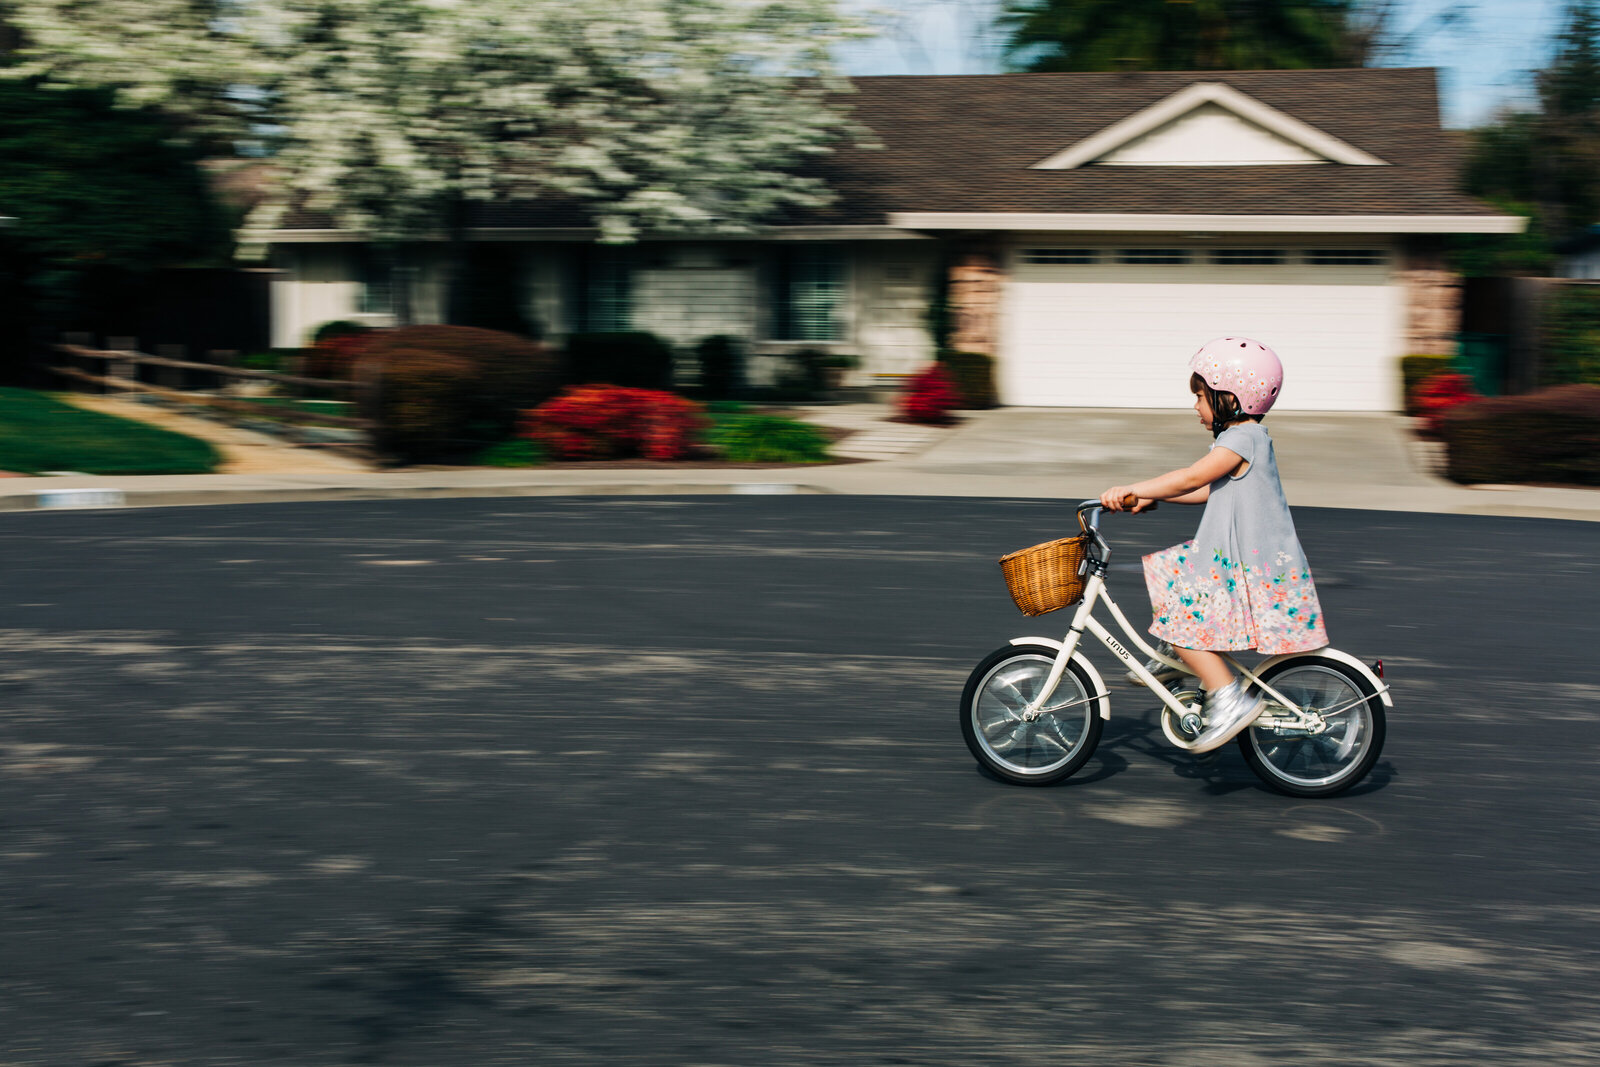 panning image of young girl on bicycle with a basket on the front